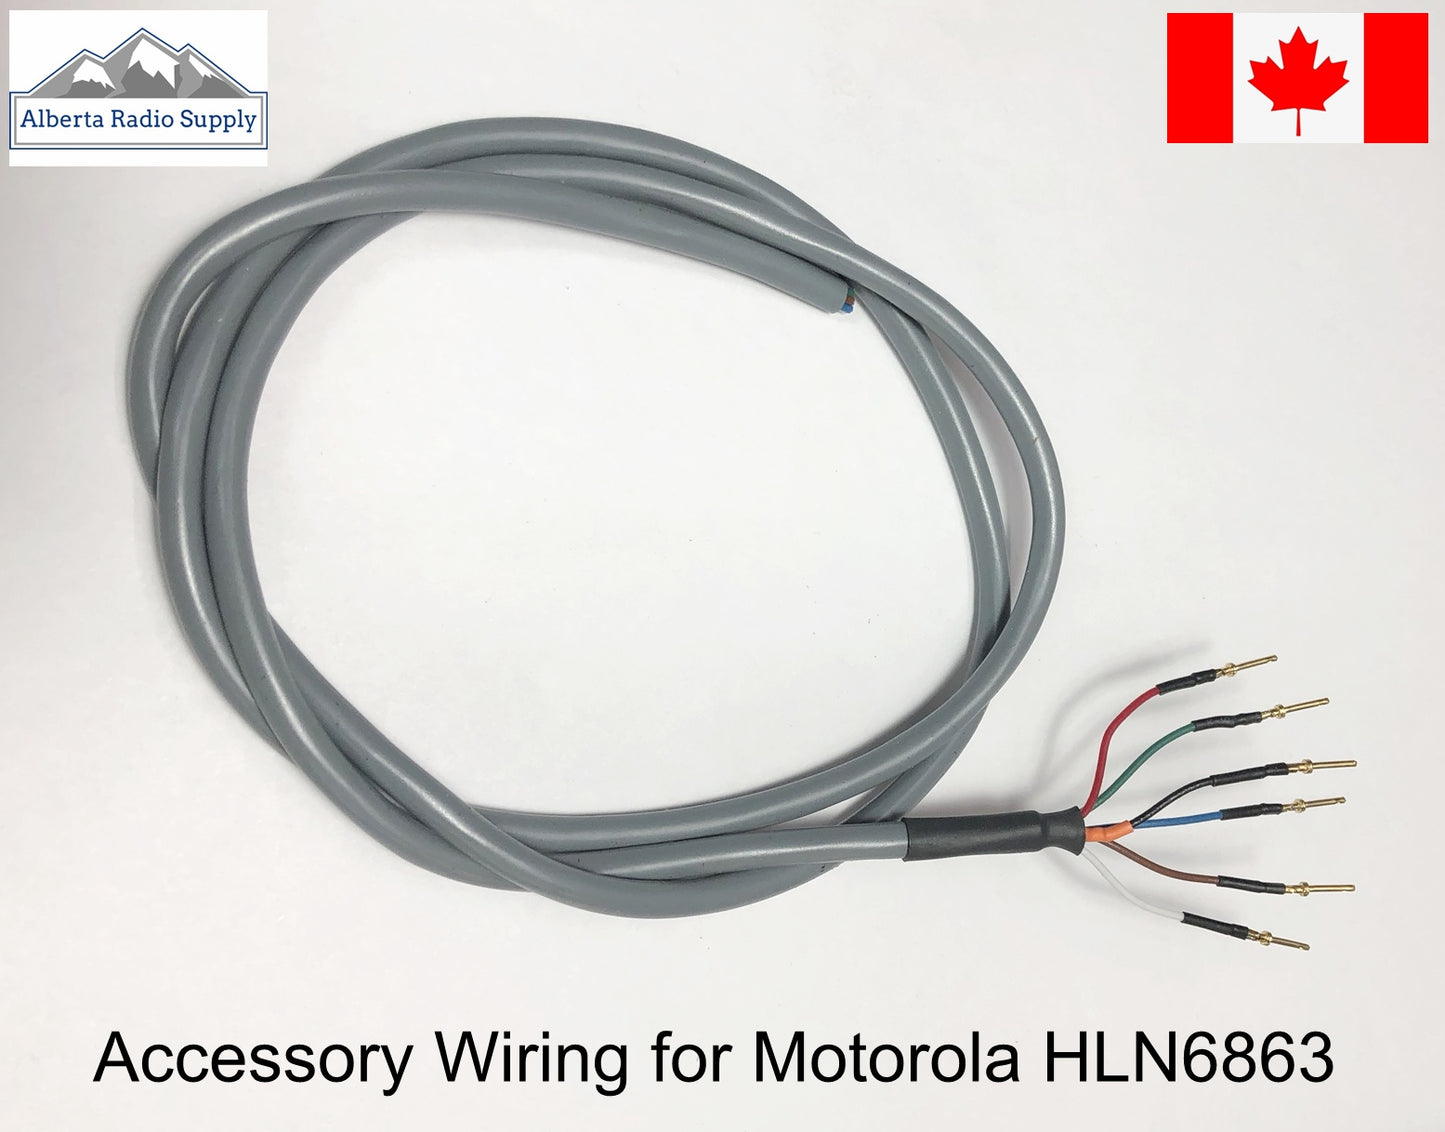 Accessory Wires for Motorola HLN6863